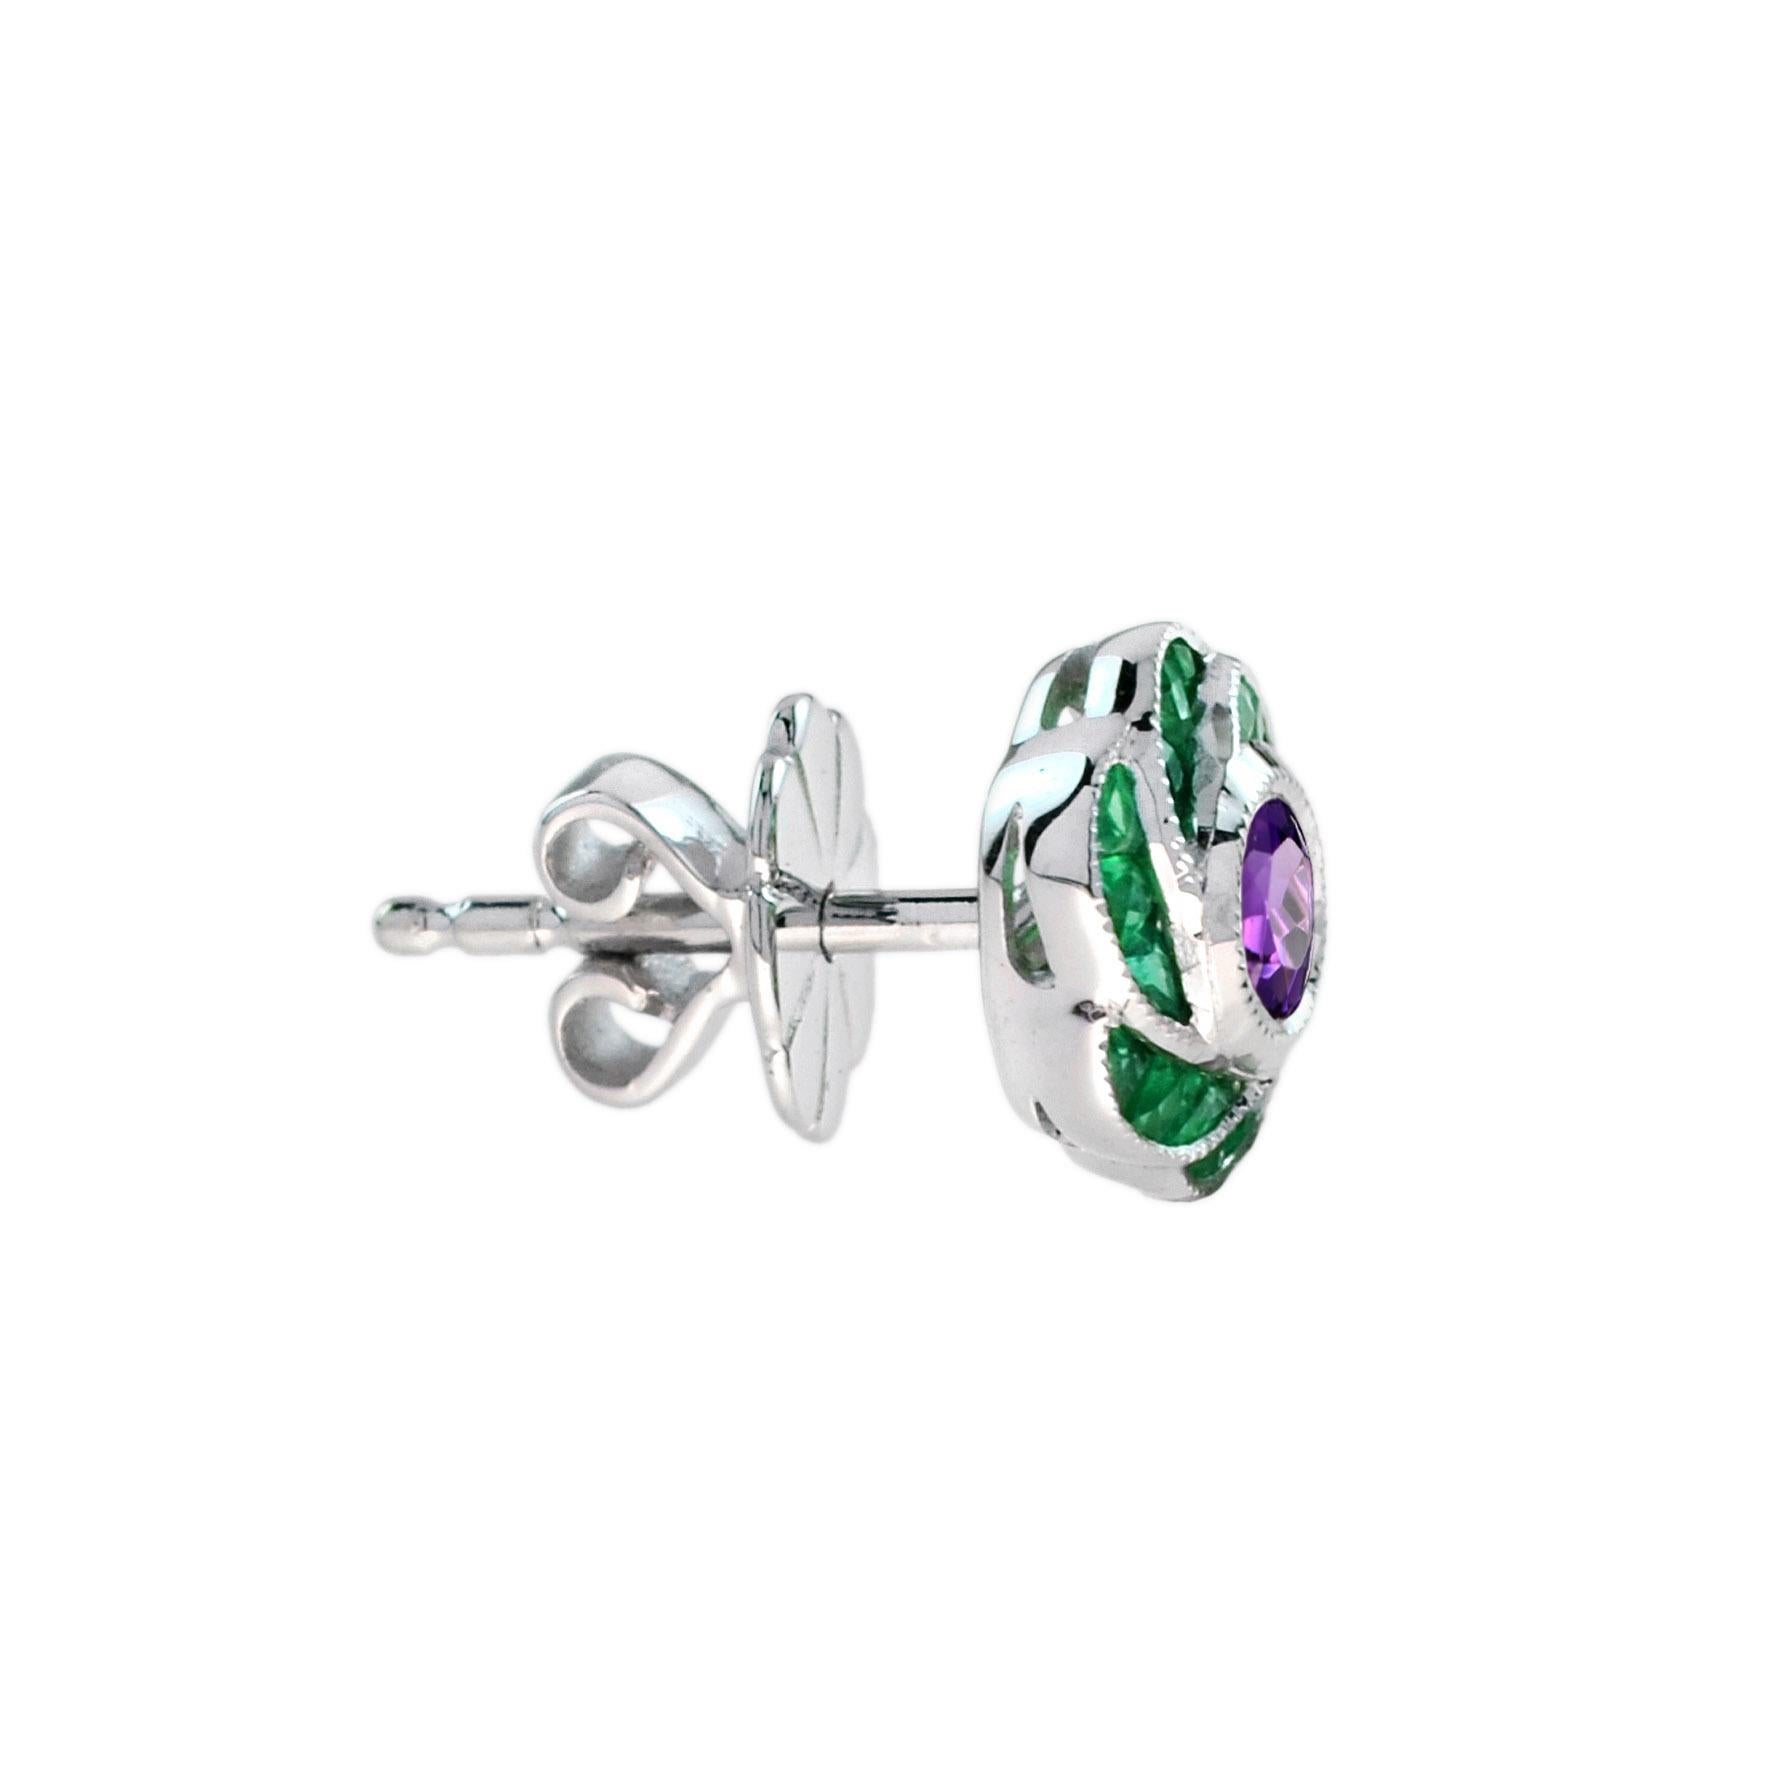 Perfect with everyday wear, these charming vintage Art Deco revivalist design stud earrings feature a pair of amethyst surrounded by French cut emerald for rose petals finished look all in 18K white gold.

Information
Style: Art-deco
Metal: 18K